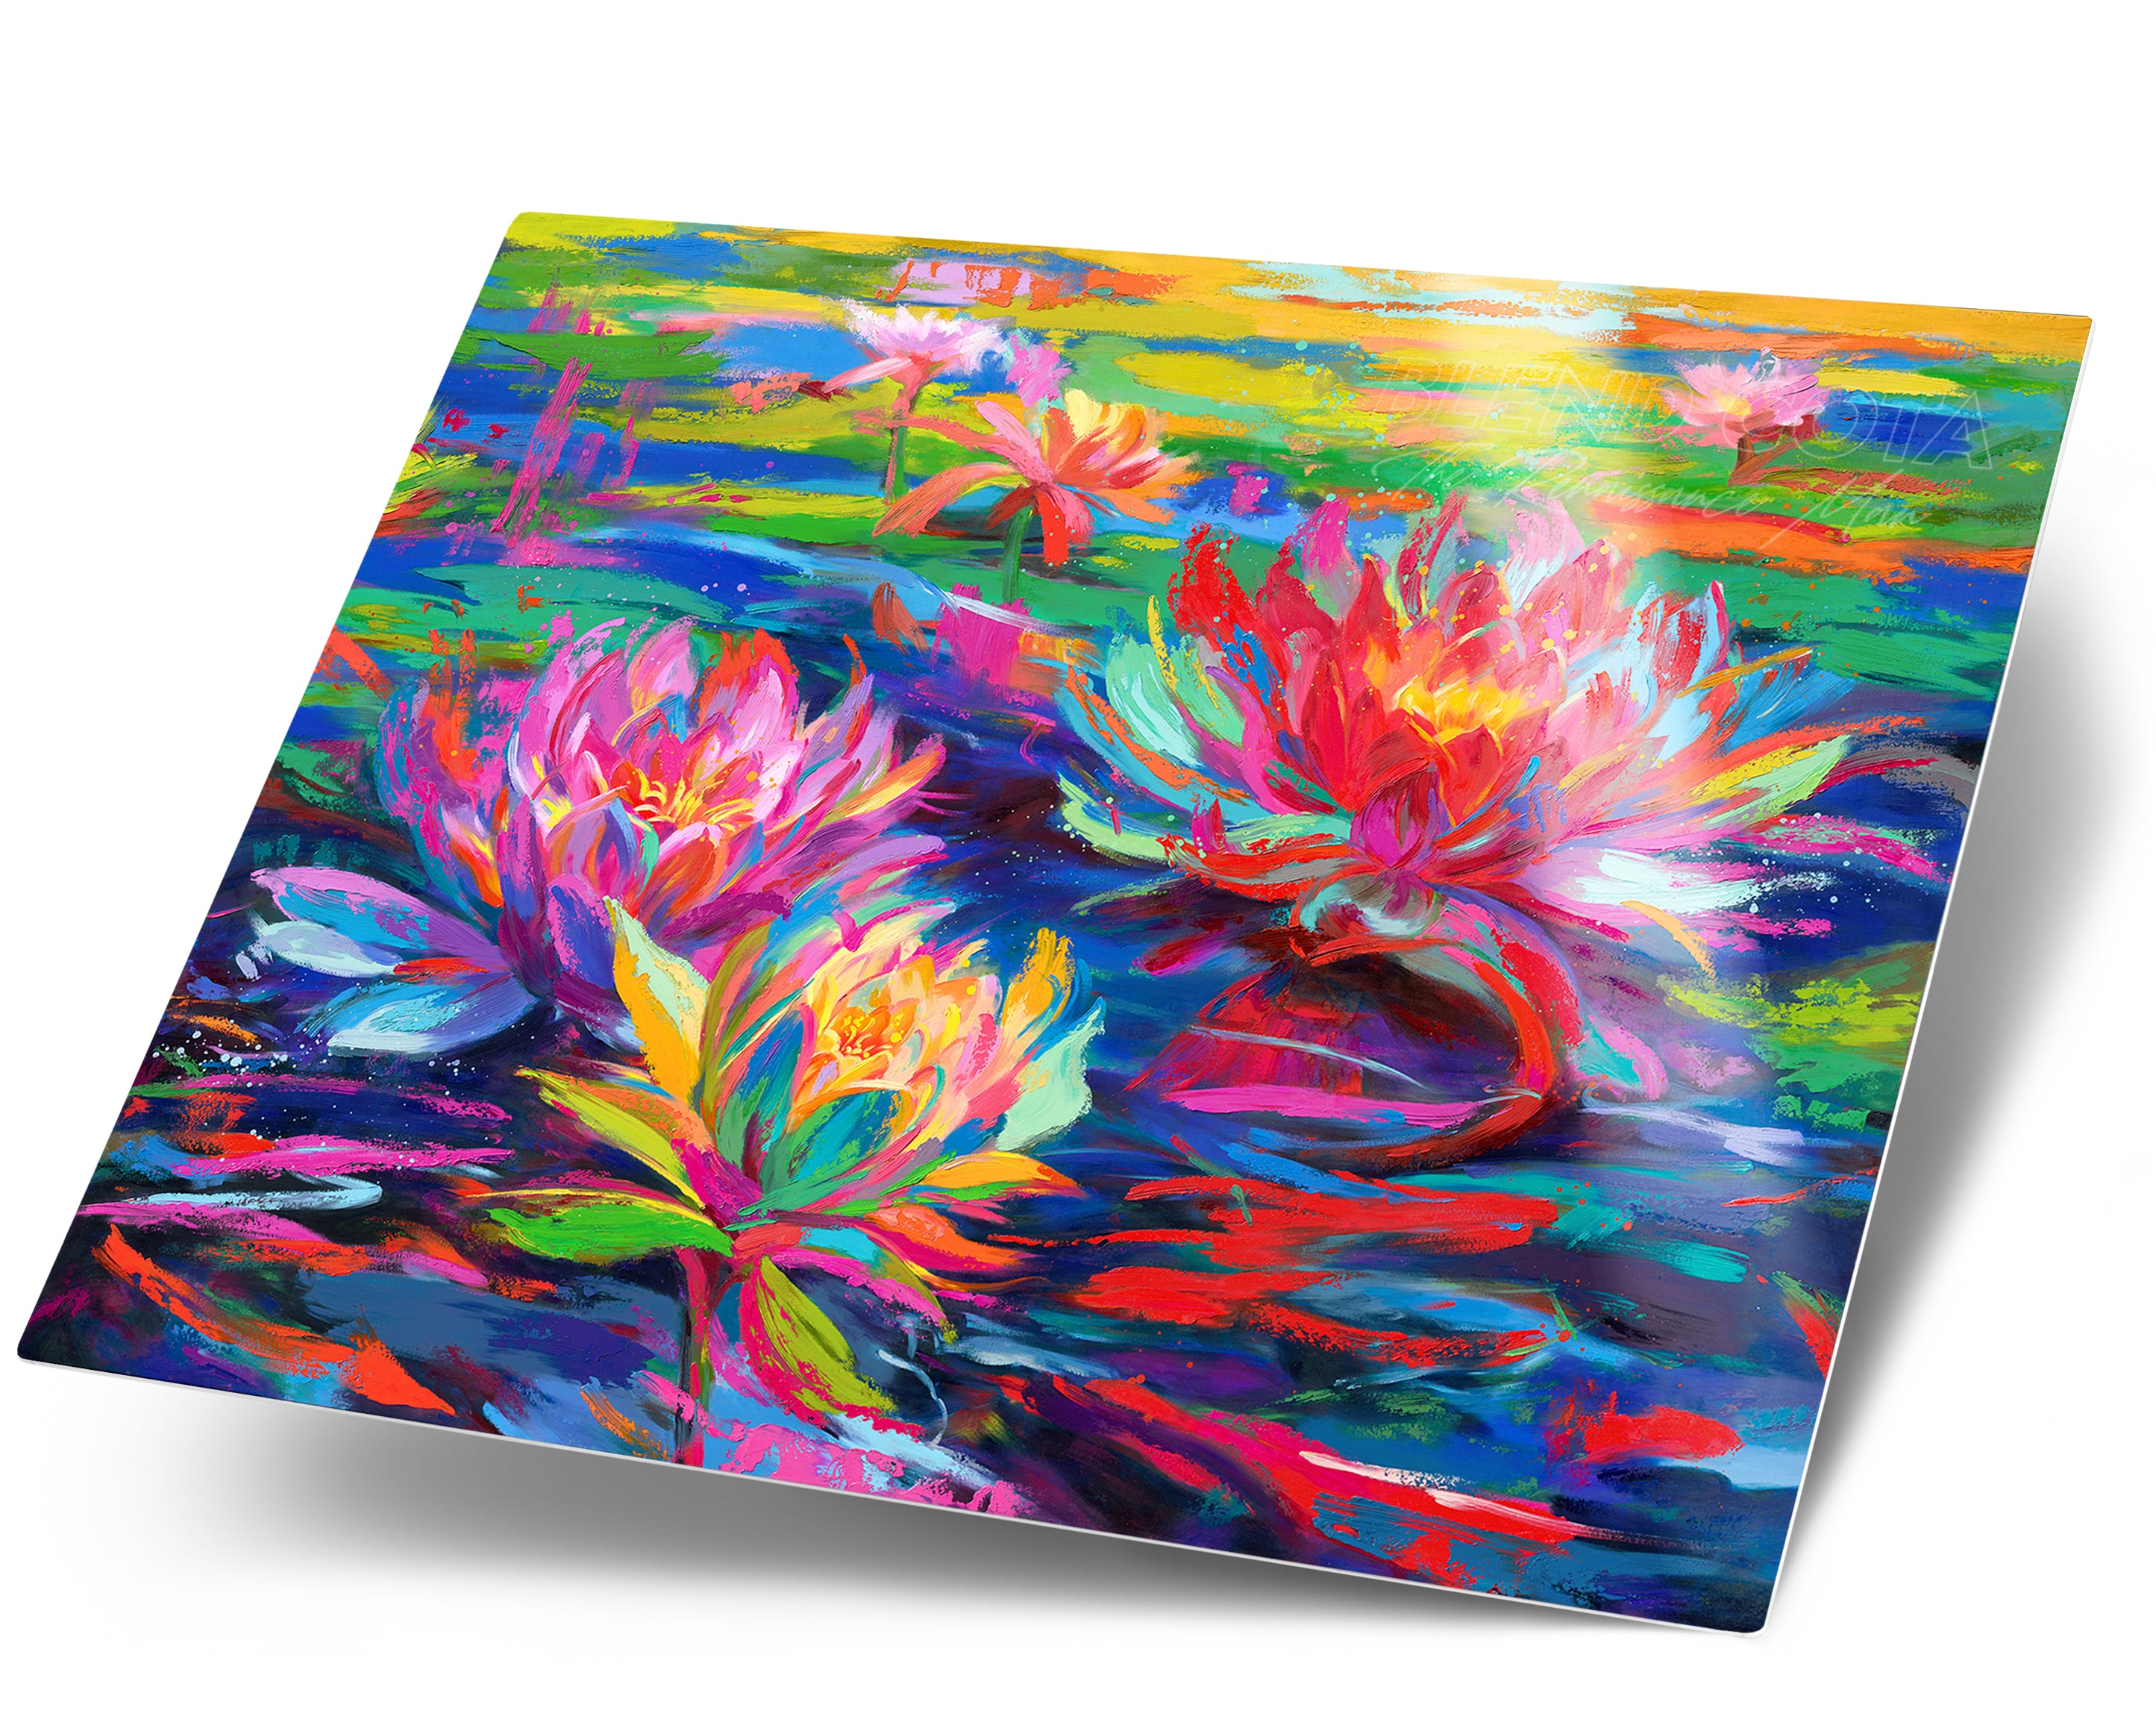 Art print on metal of red, pink and yellow water lilies blooming in a pond of lily pads, abundant and vibrant flowers in colorful brushstrokes, color expressionism style.